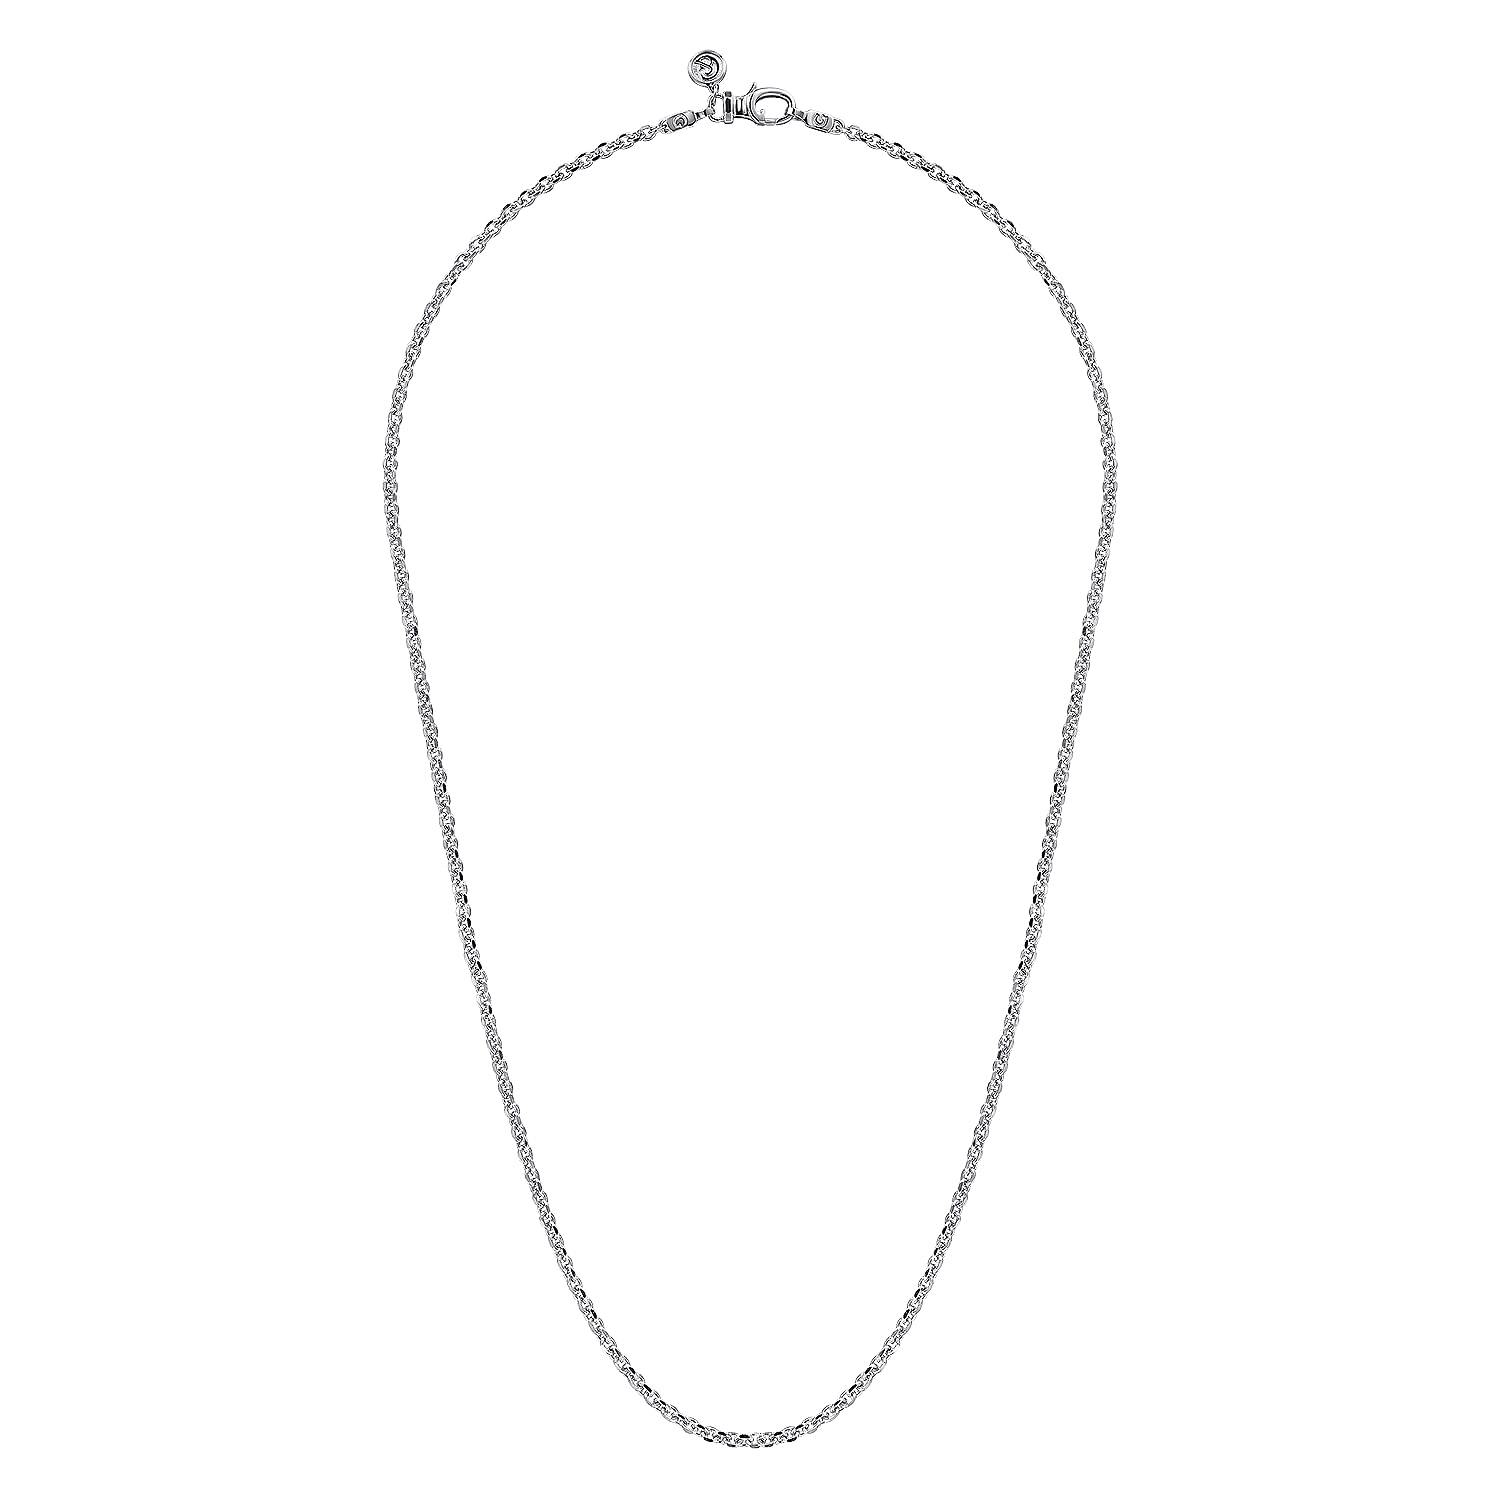 22 Inch 925 Sterling Silver Solid Men's Link Chain Necklace